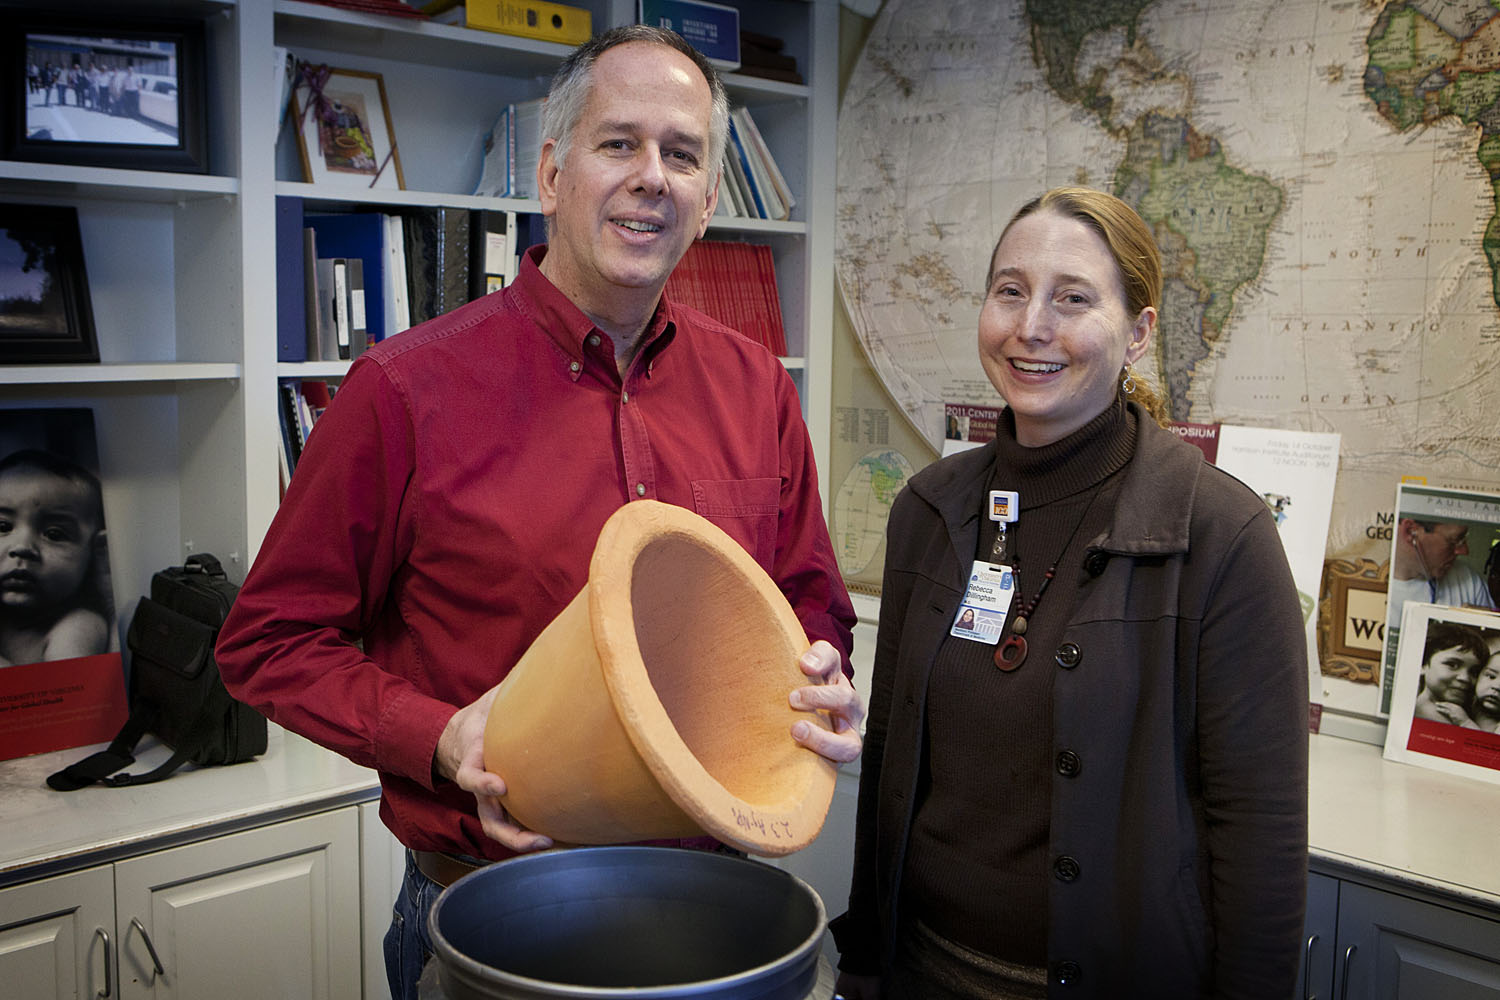 Jim Smith and Dr. Rebecca Dillingham stand together smiling at the camera holding a ceramic water filter 